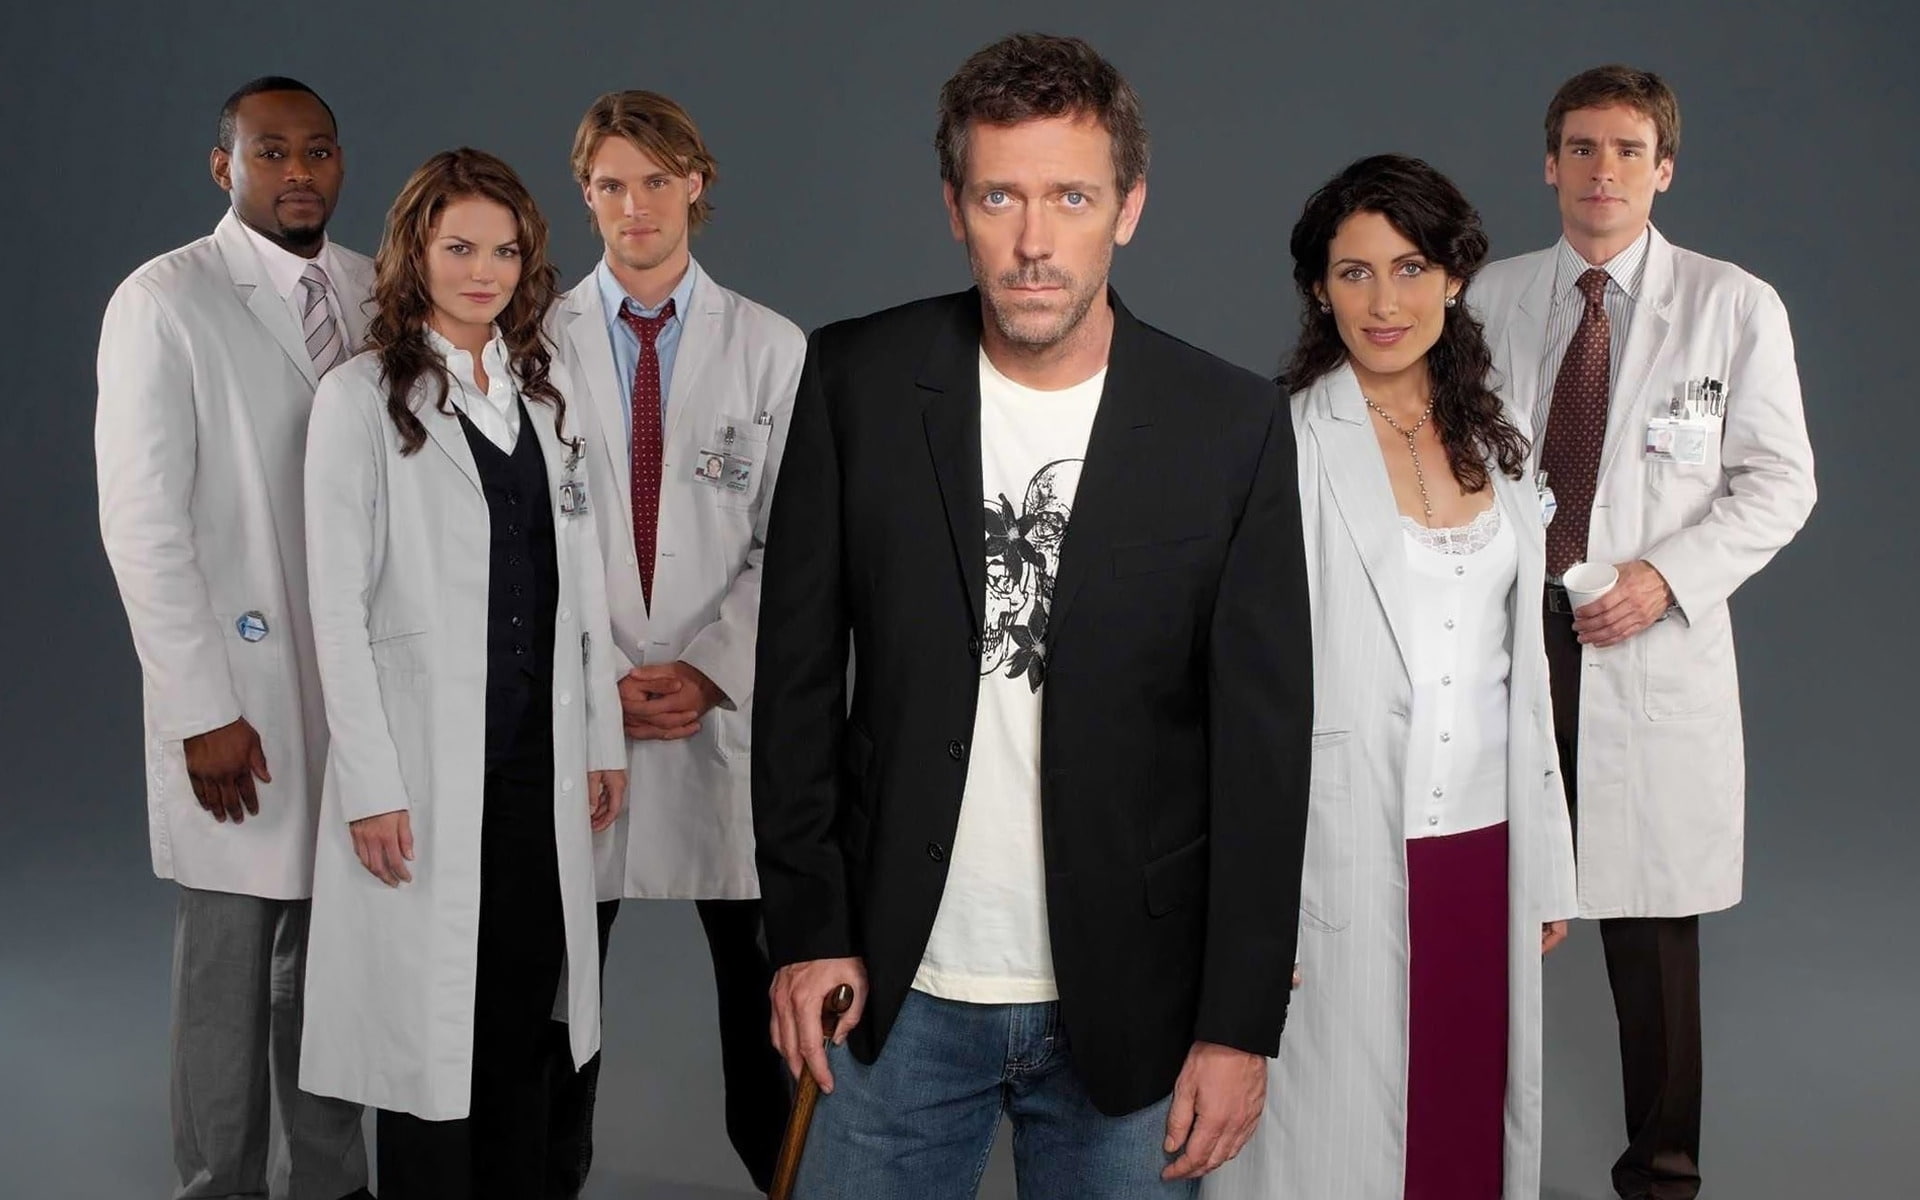 Free Movie Wallpaper - Dr House And Team - HD Wallpaper 